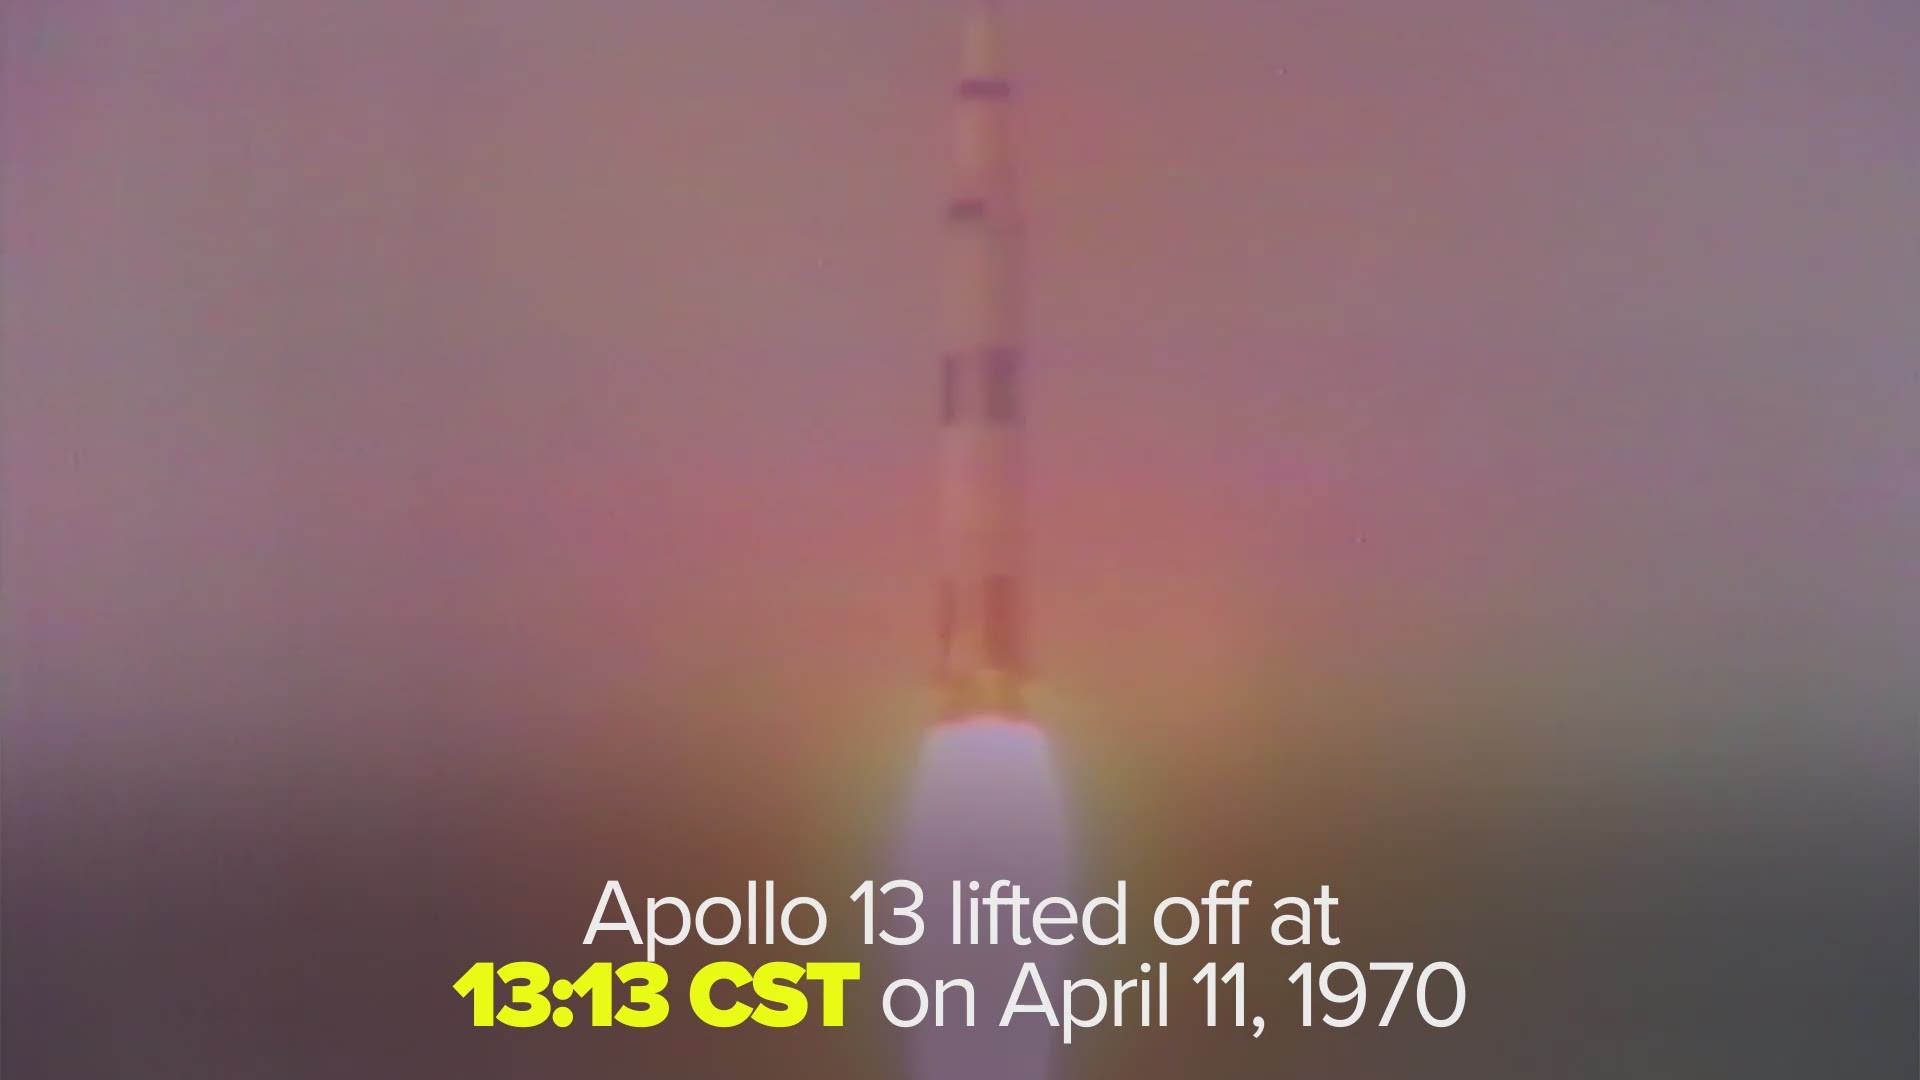 Facts about the Apollo 13 mission that went from a trip to the moon to a desperate rescue.